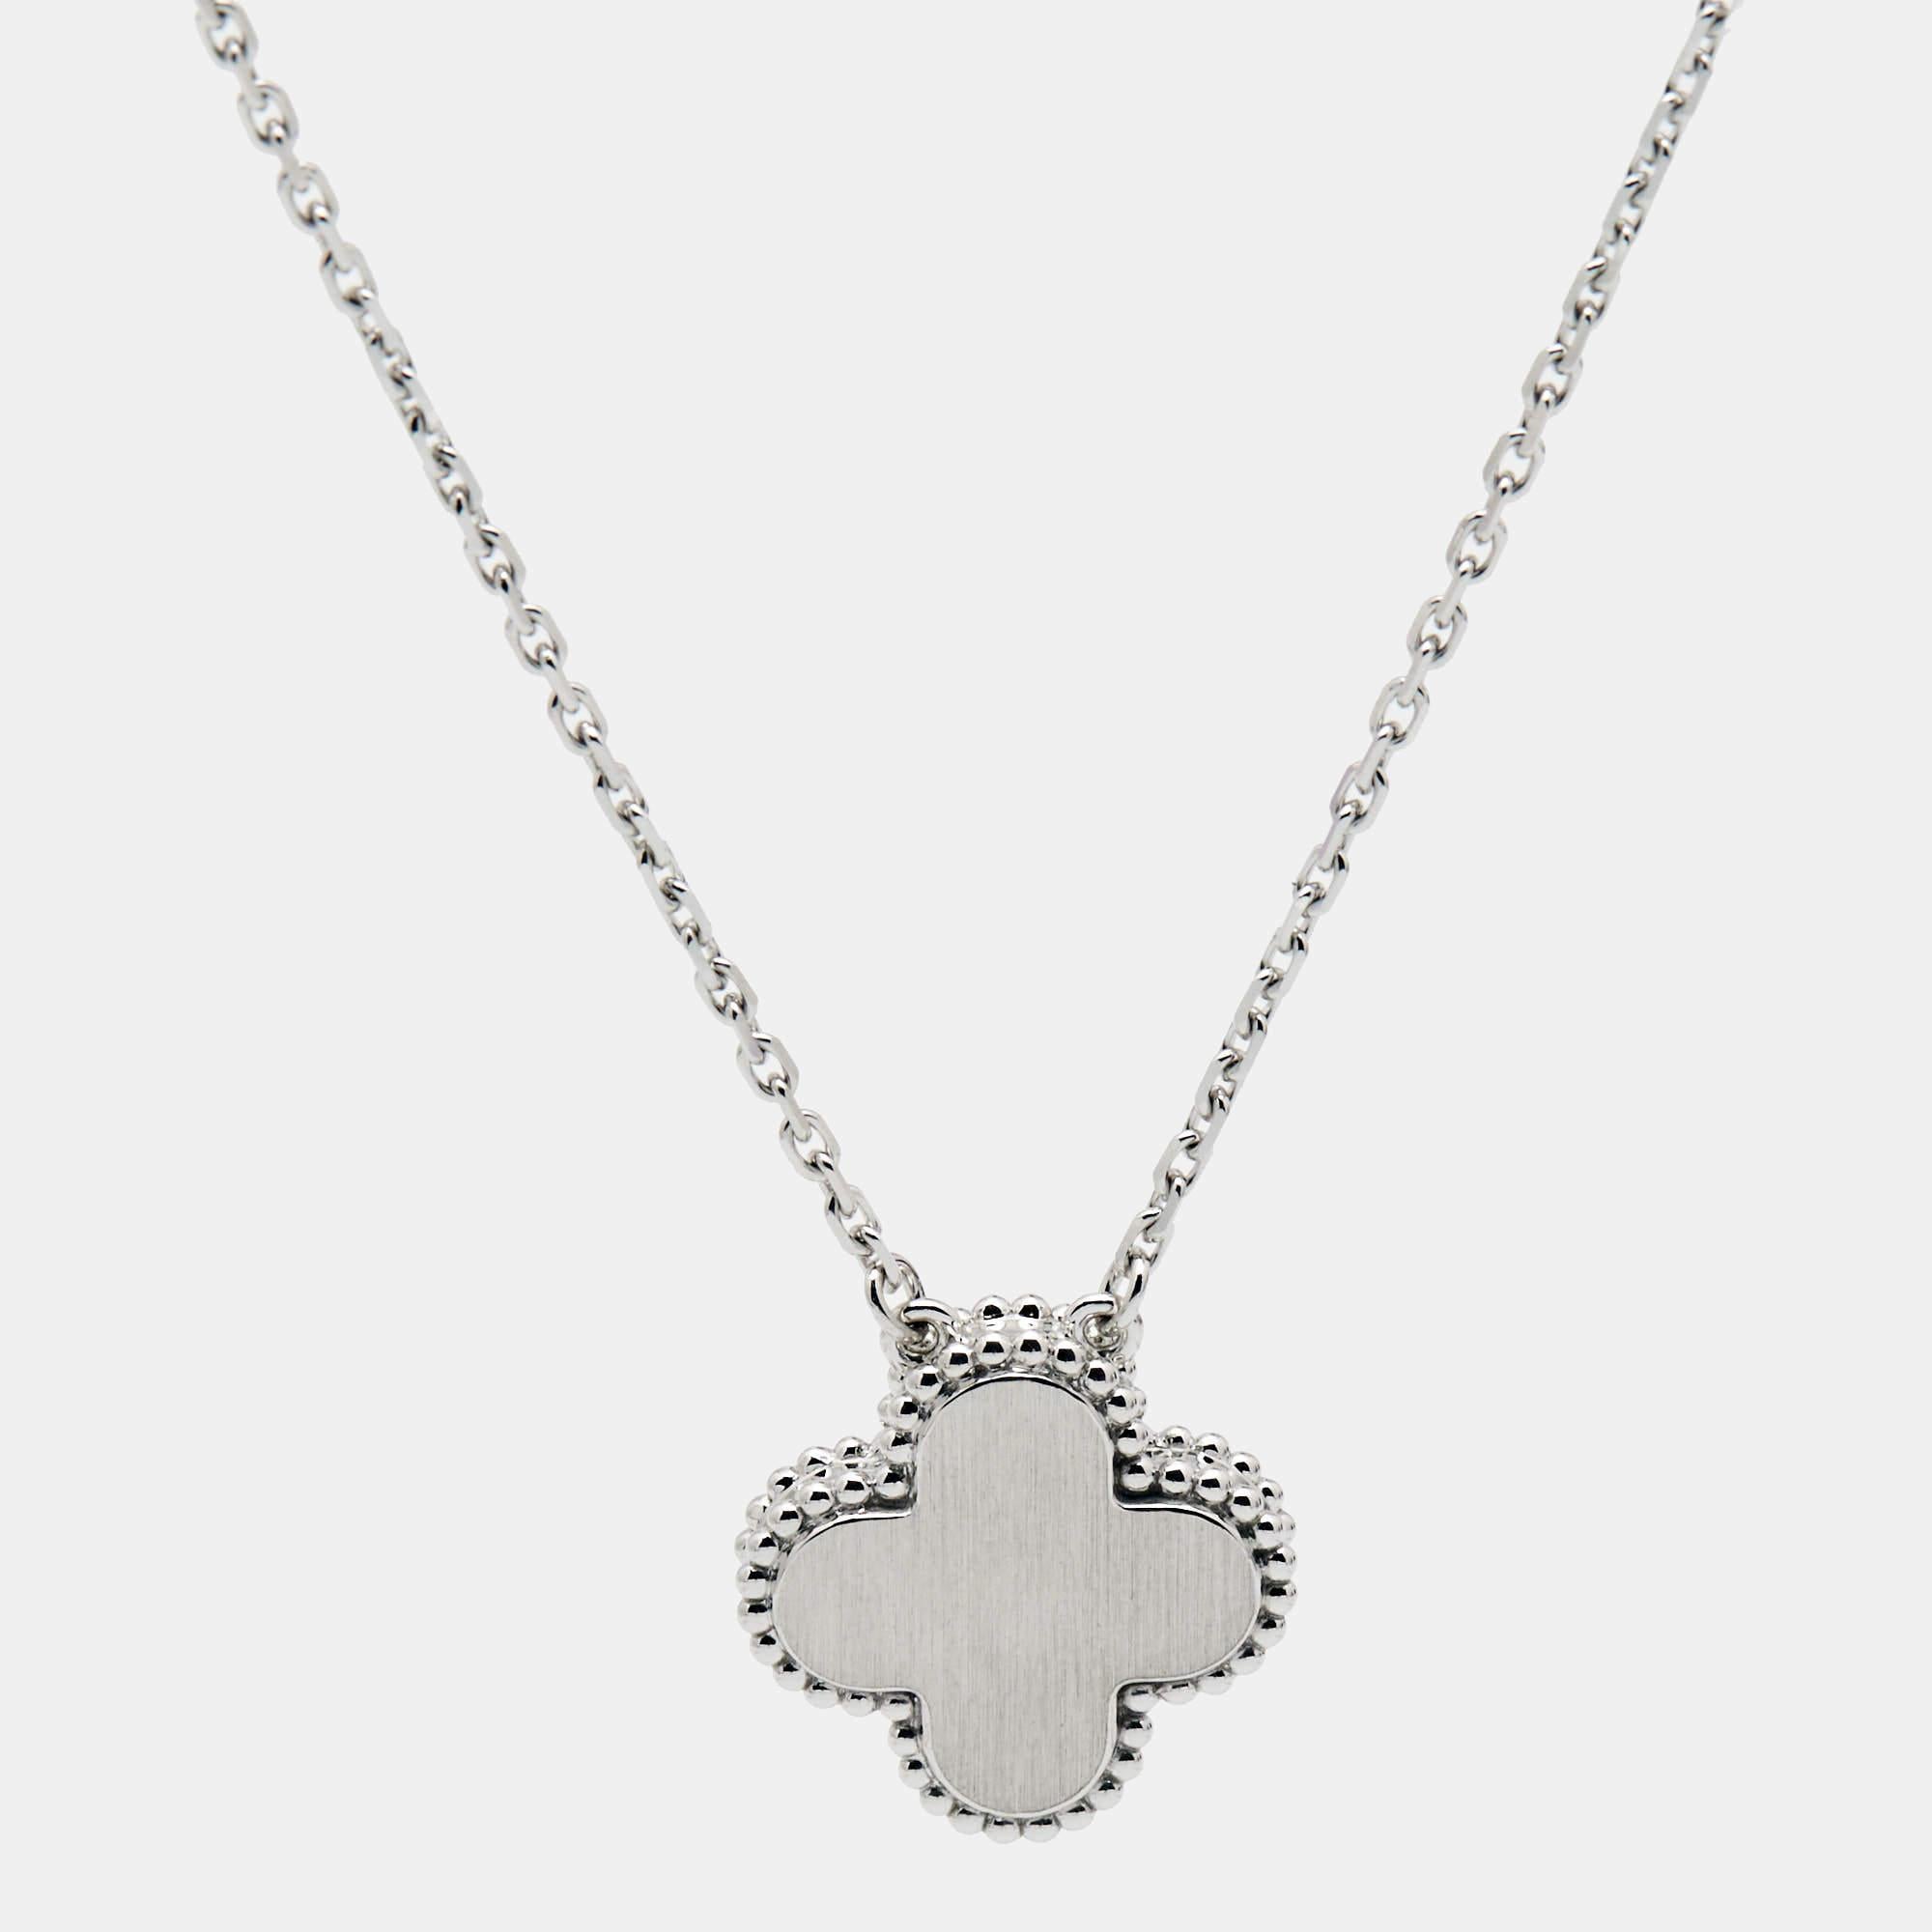 Van Cleef & Arpels’ Alhambra jewel was first created in 1968, and the Vintage Alhambra creations remain faithful to its timeless elegance. The iconic motif is a symbol of good luck, health, fortune, and love. This limited-edition necklace features a